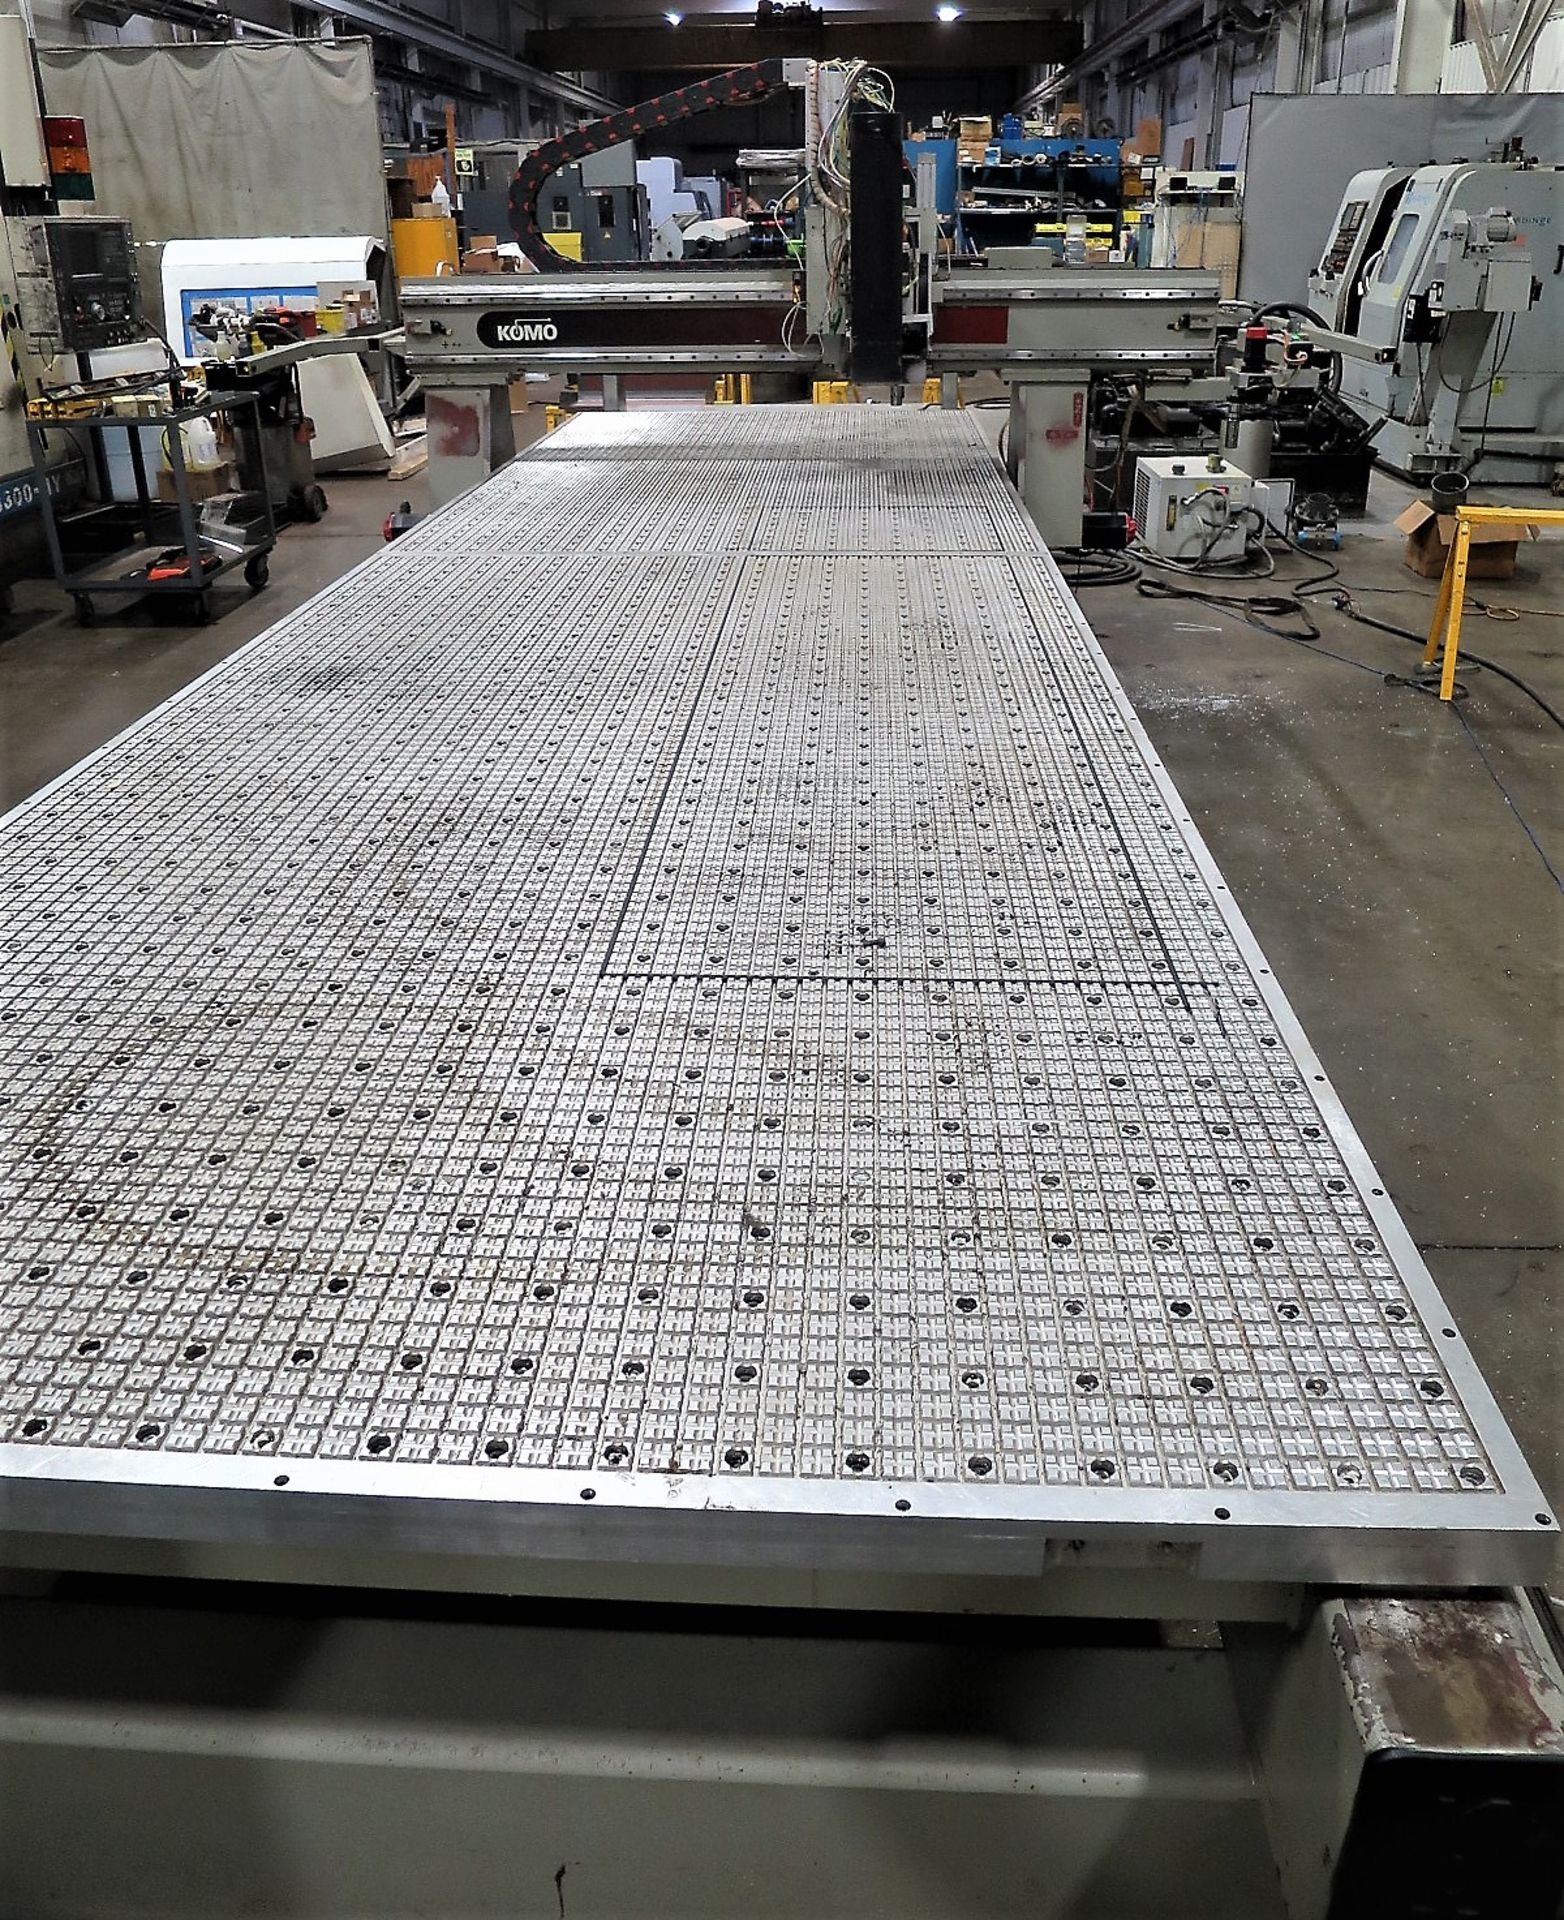 72"x280" Komo Mach One GT 636 CNC large Format Router, S/N 12178, New 2010 - Image 7 of 12